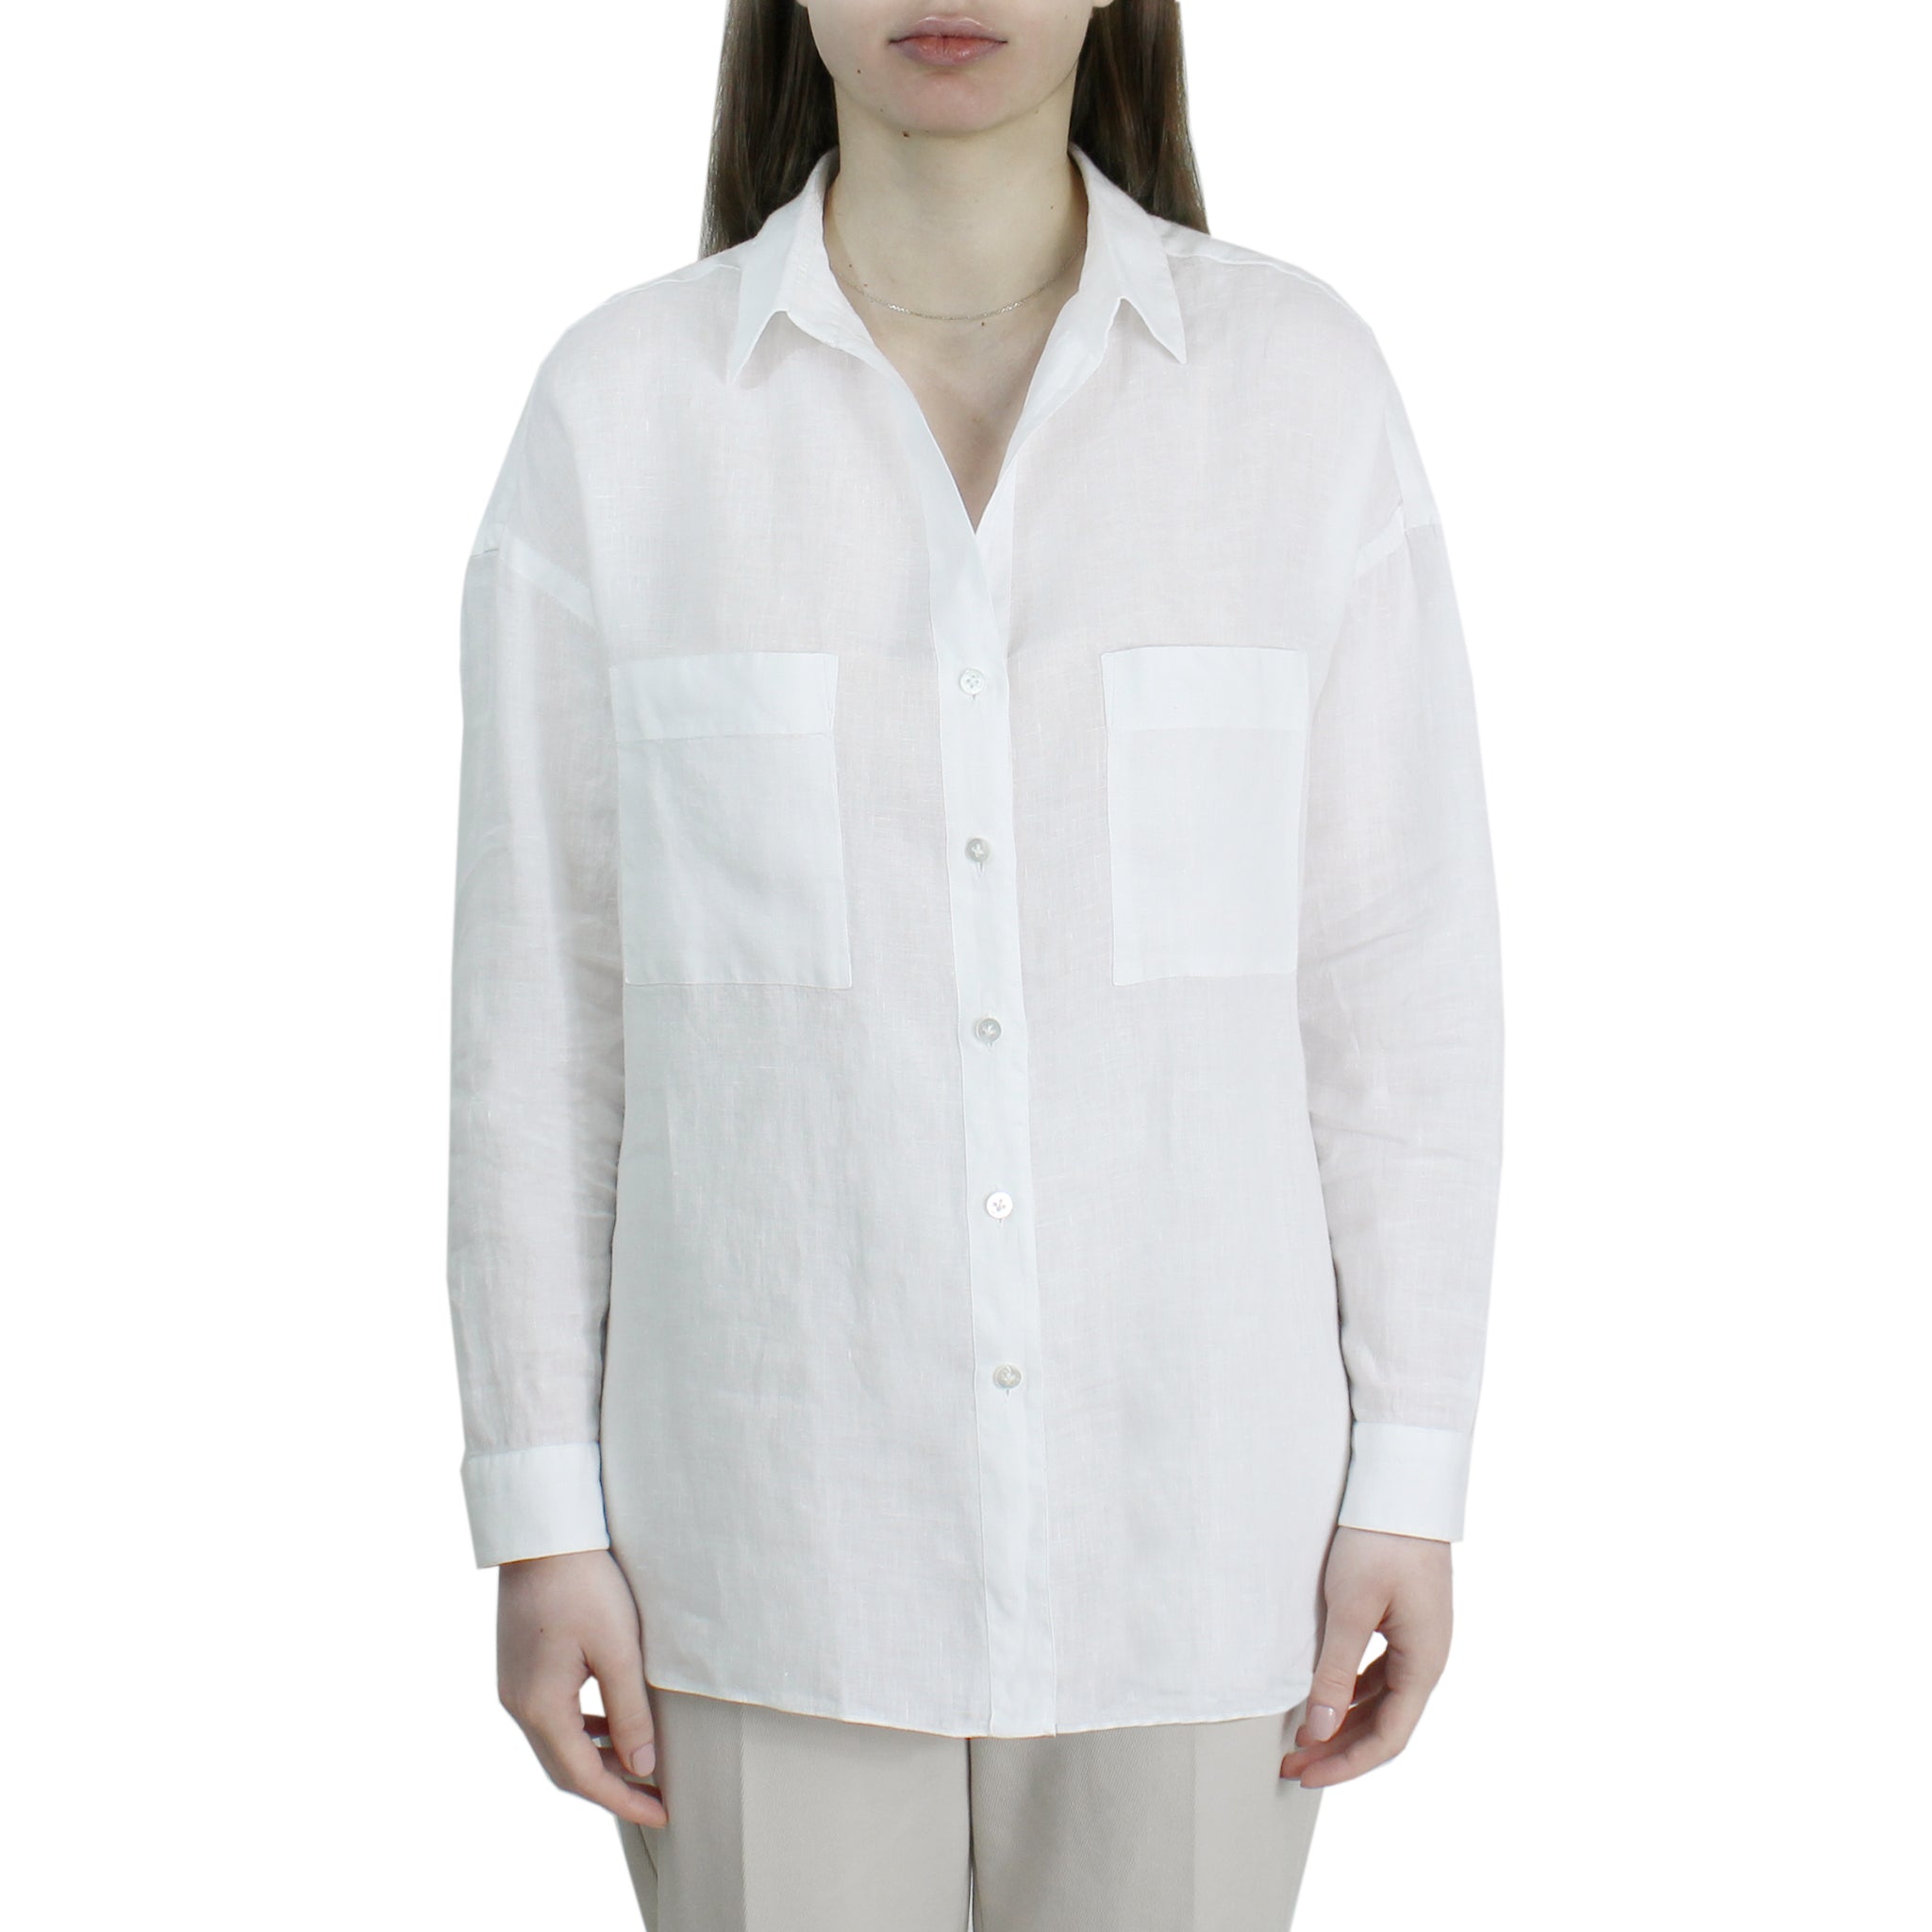 White linen shirt with pockets and webbing to adjust the sleeve